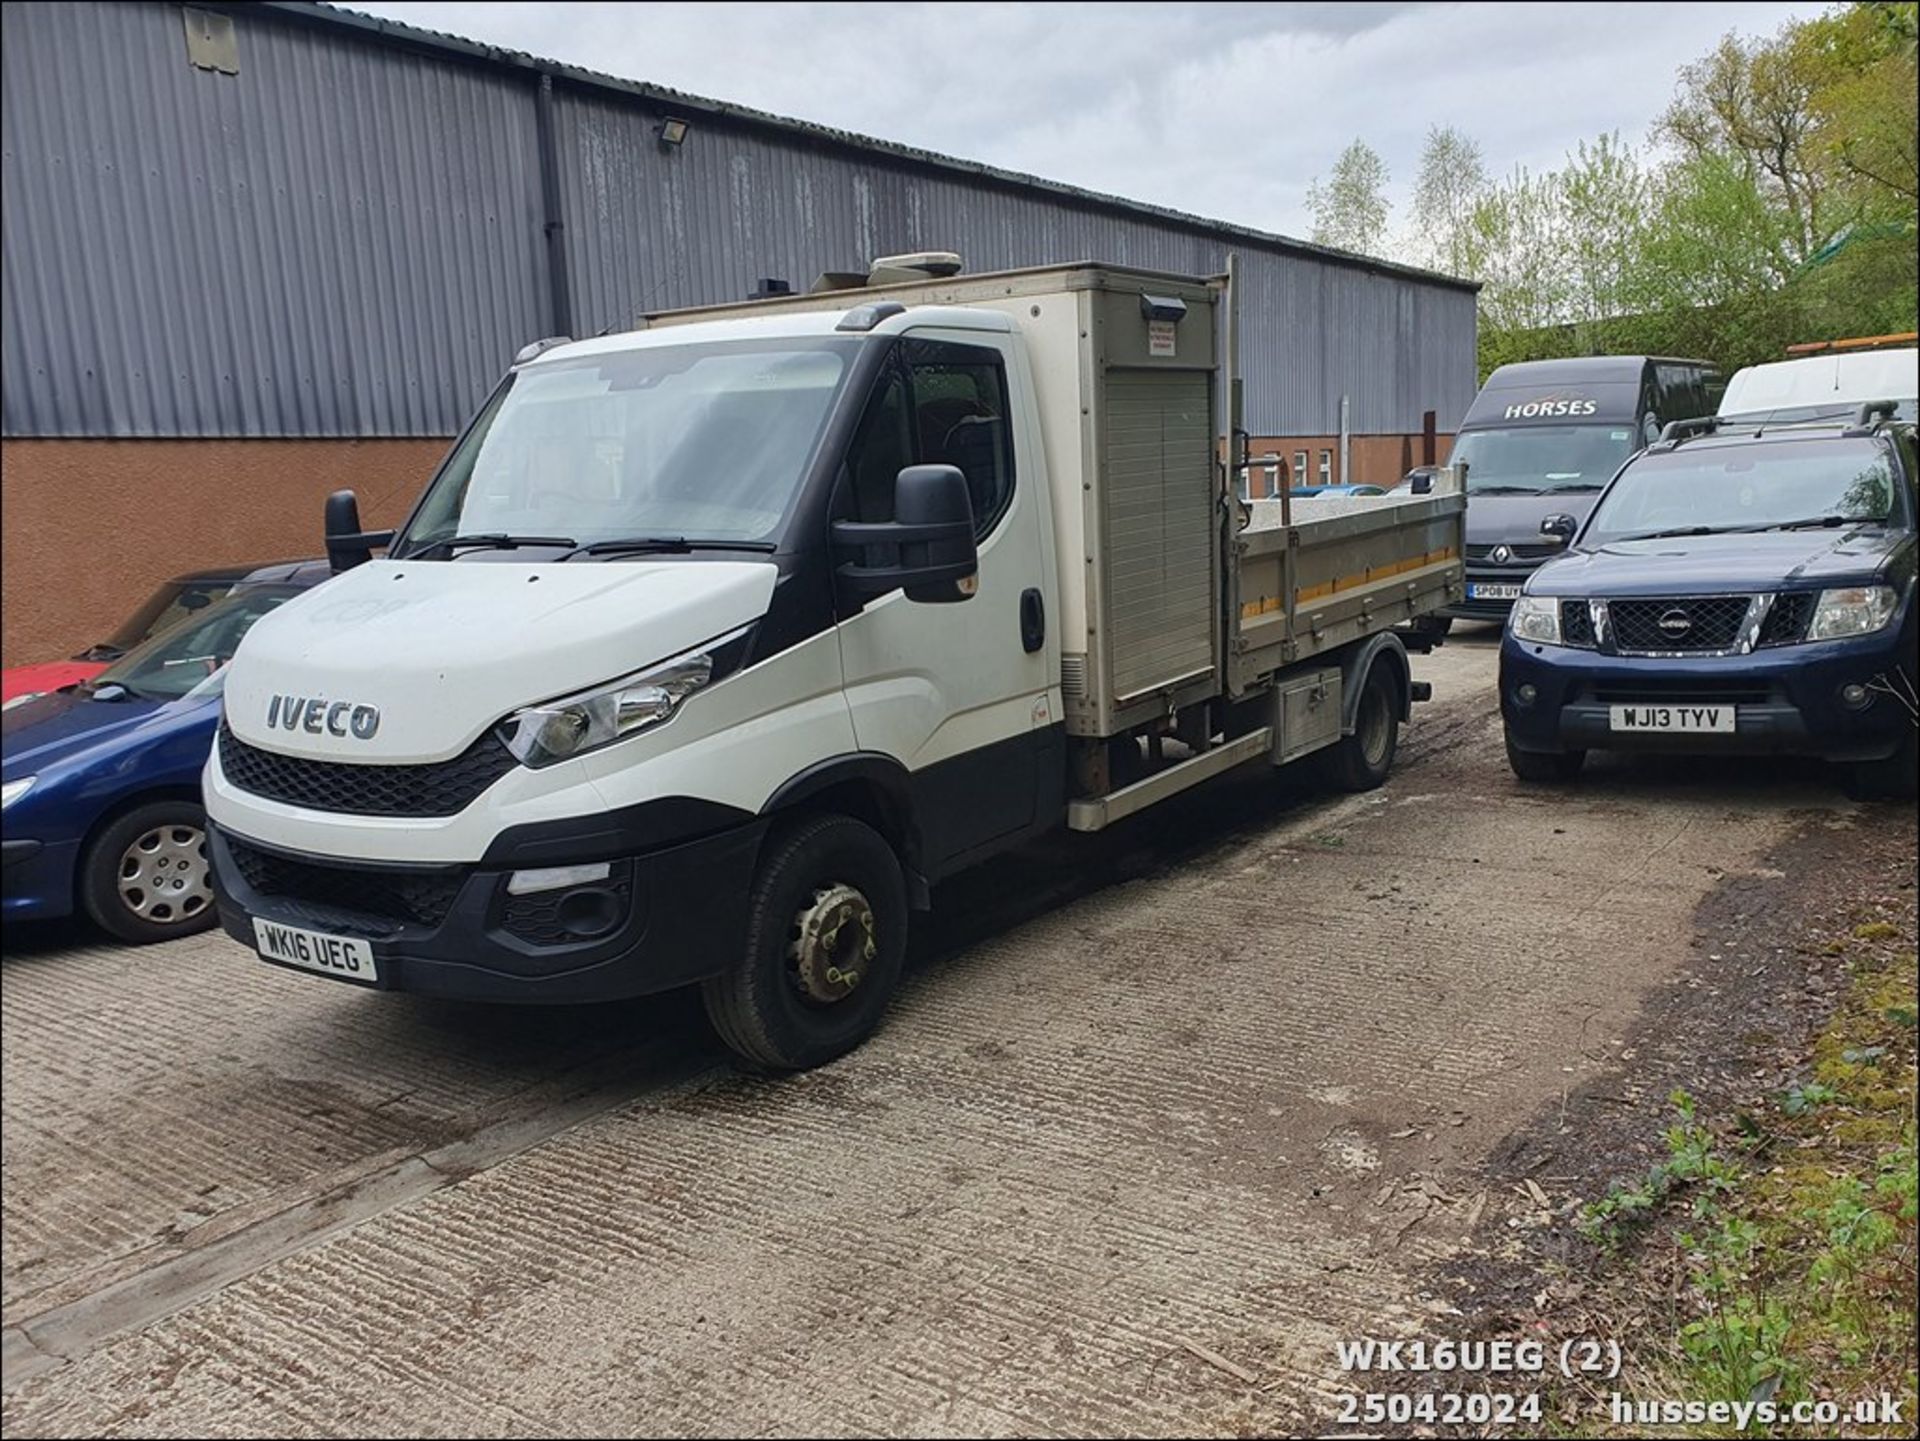 16/16 IVECO DAILY 70C17 - 2998cc 2dr Tipper (White, 193k) - Image 5 of 28